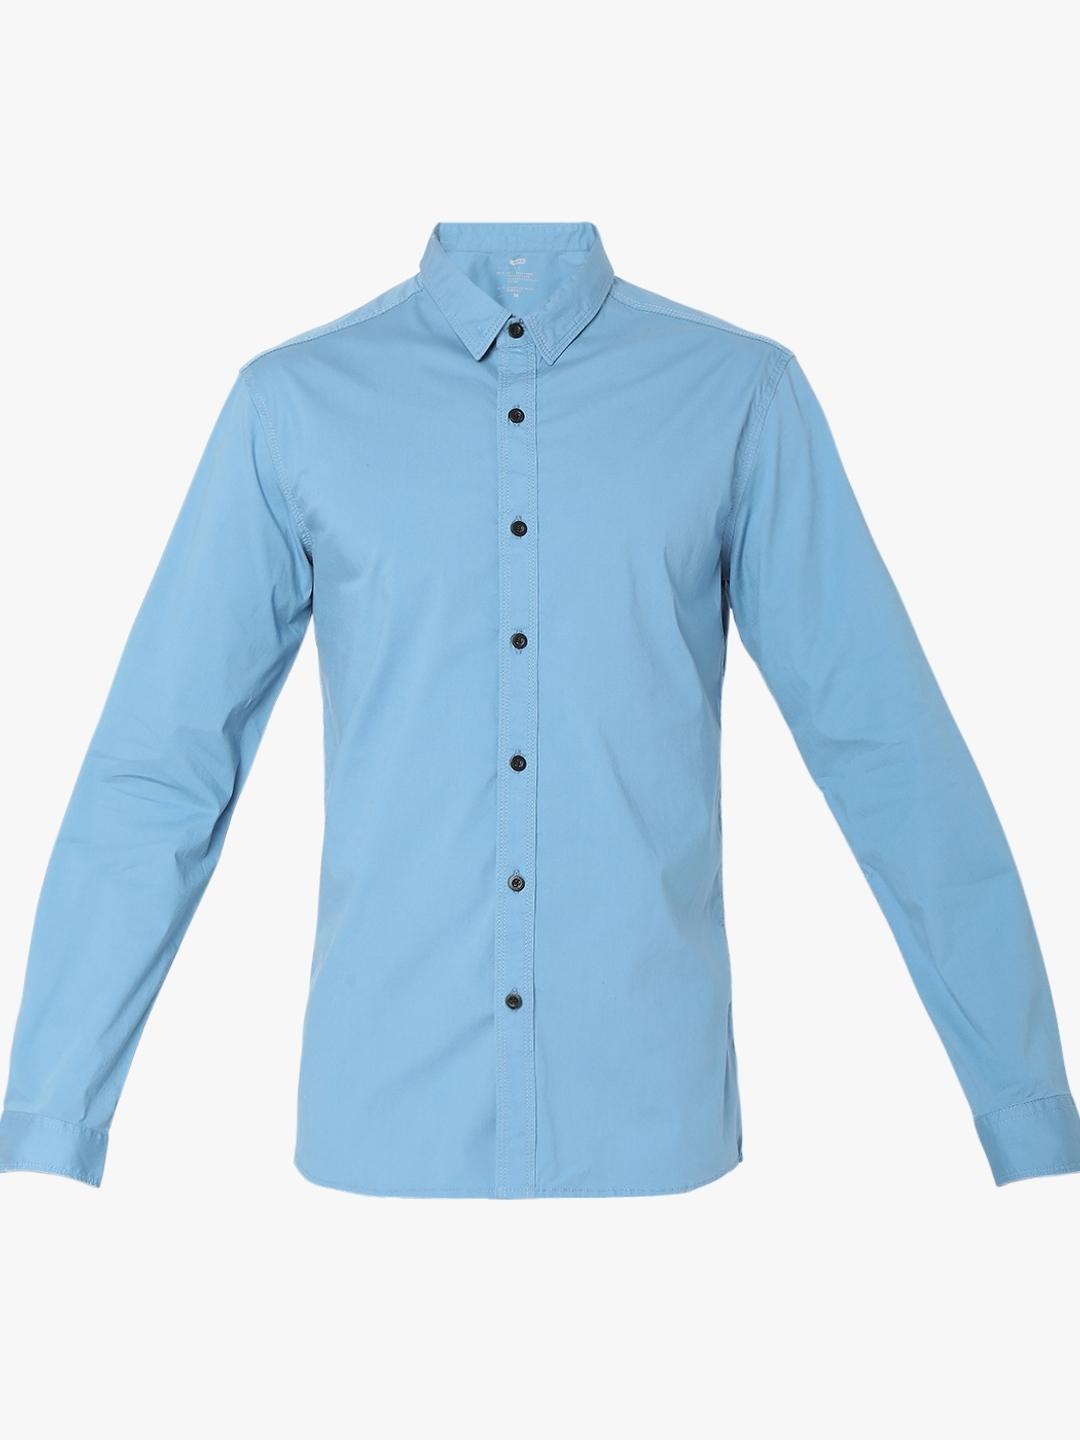 Andrew Mix Shirt with Spread Collar